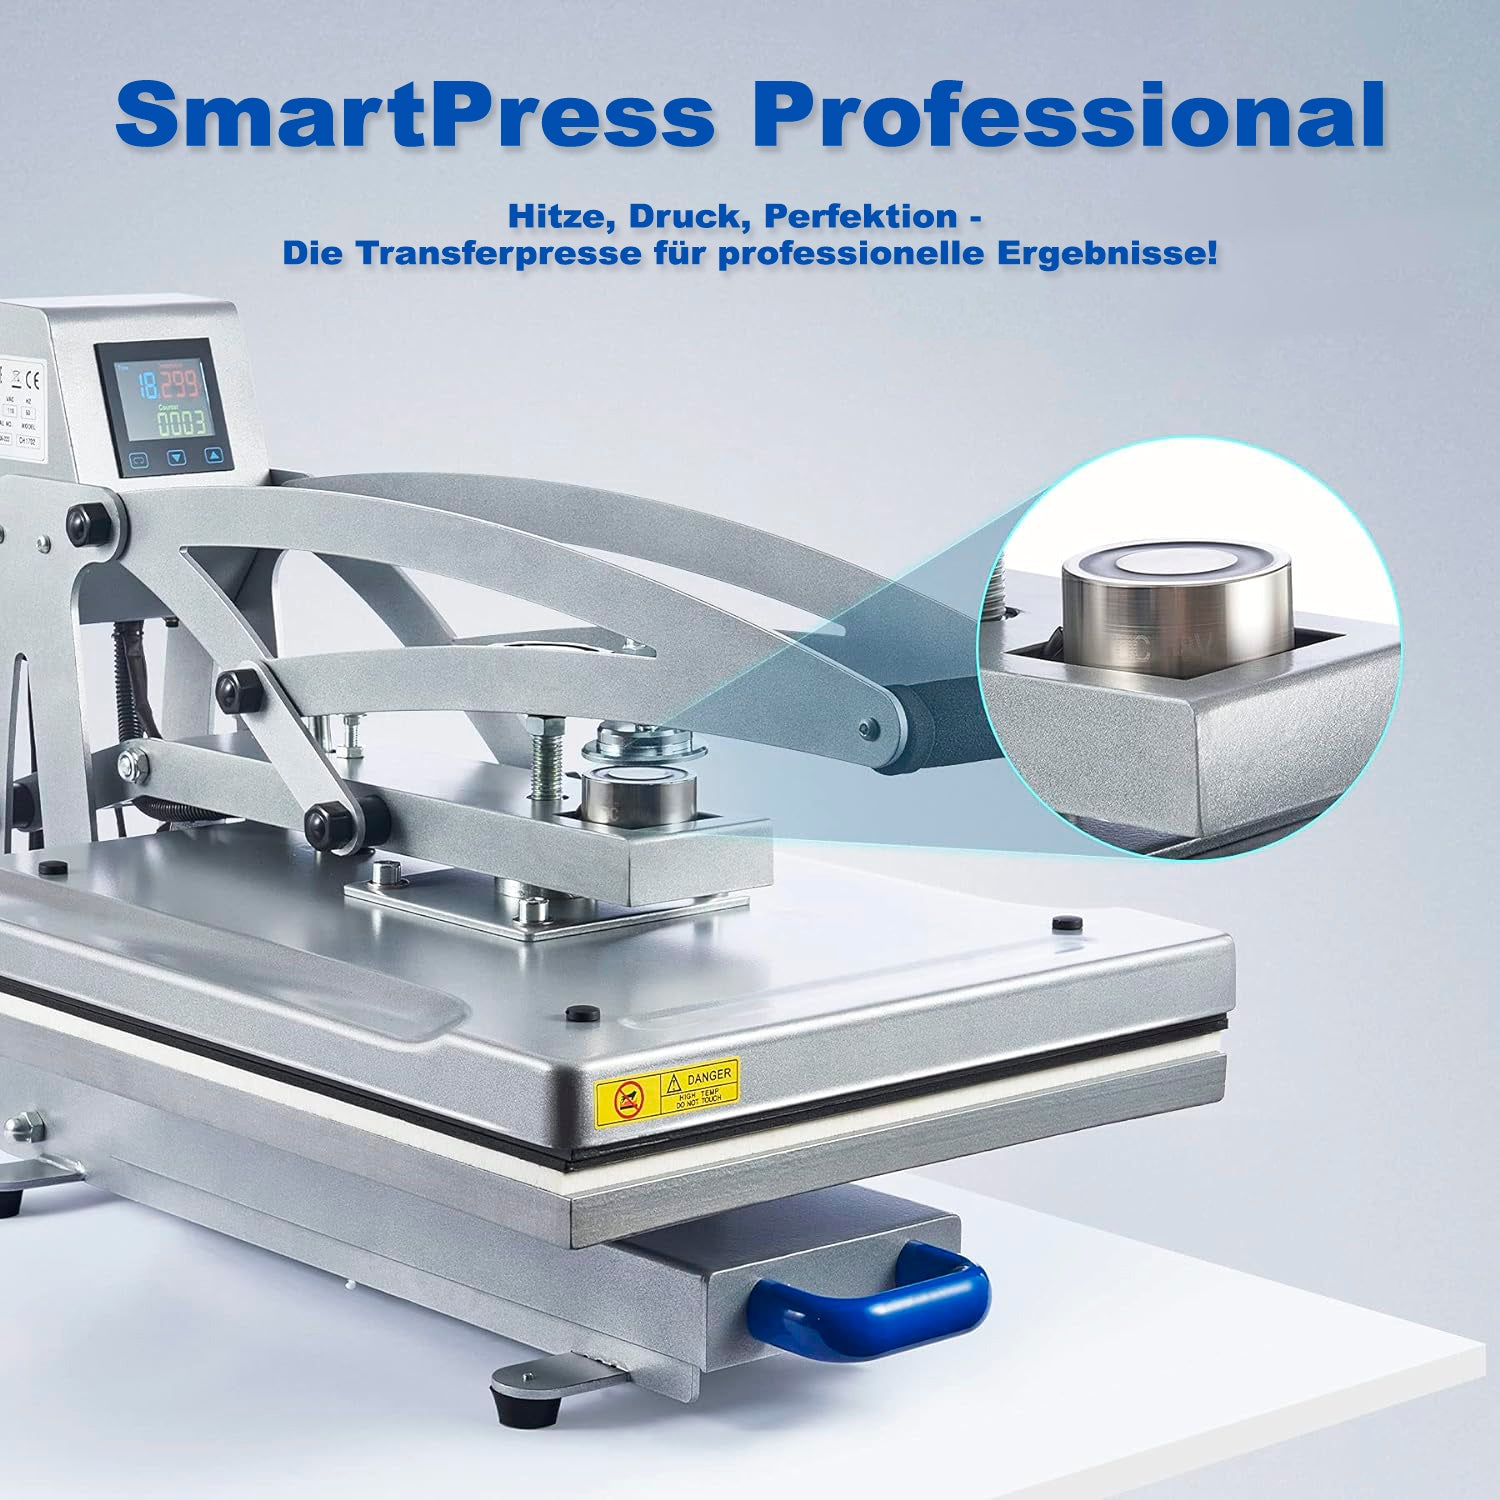 SmartPress Professional transfer presses with interchangeable plate system